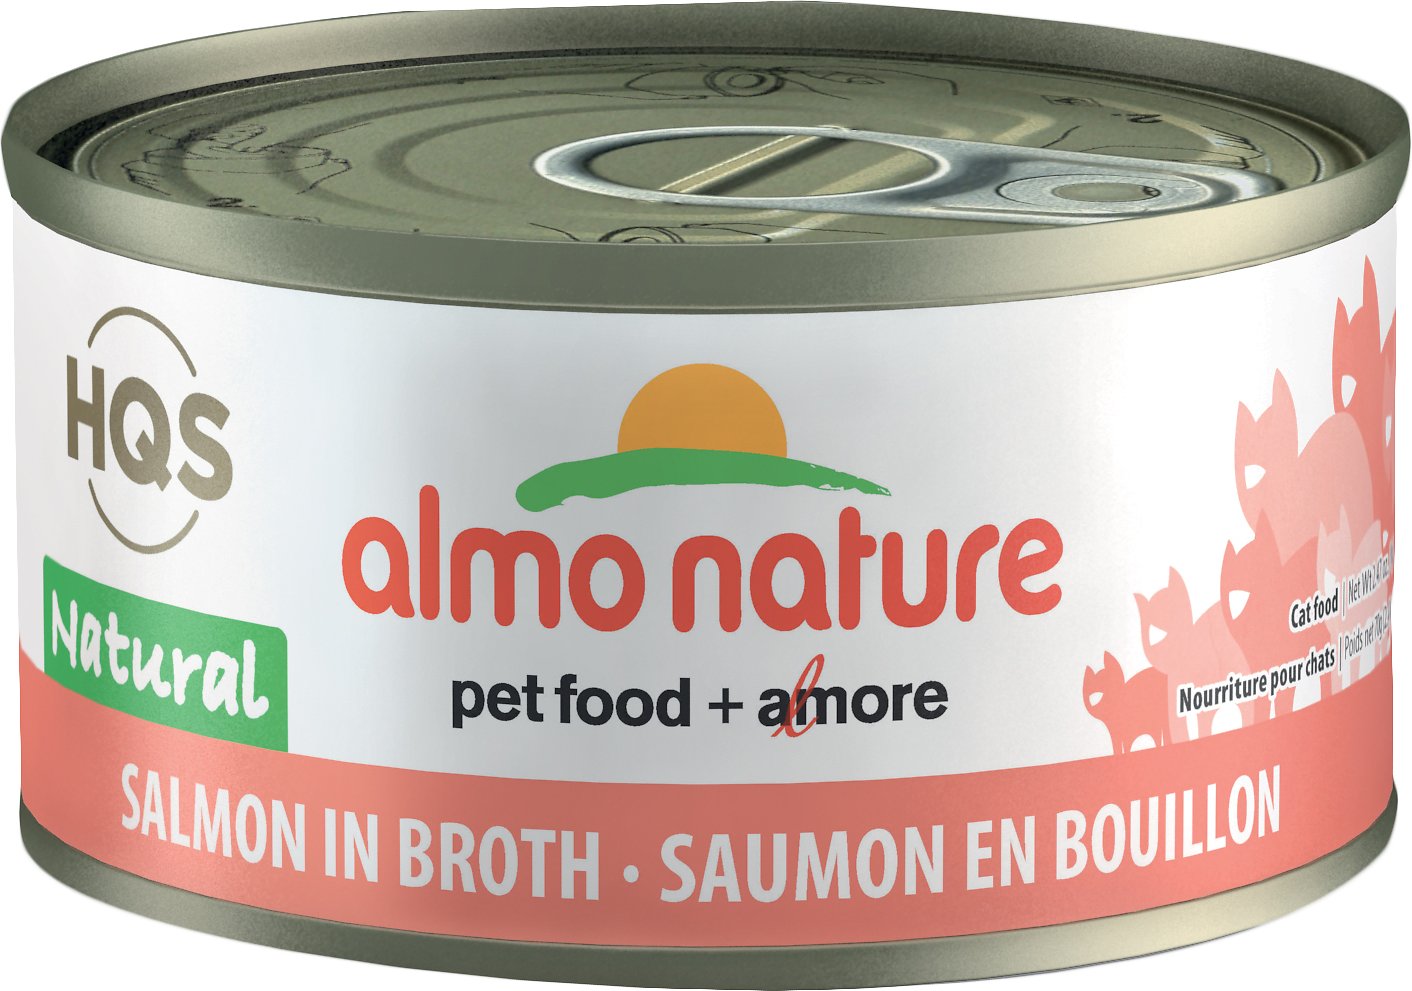 Almo Nature | Cat Food Delivery Toronto | ARMOR THE POOCH